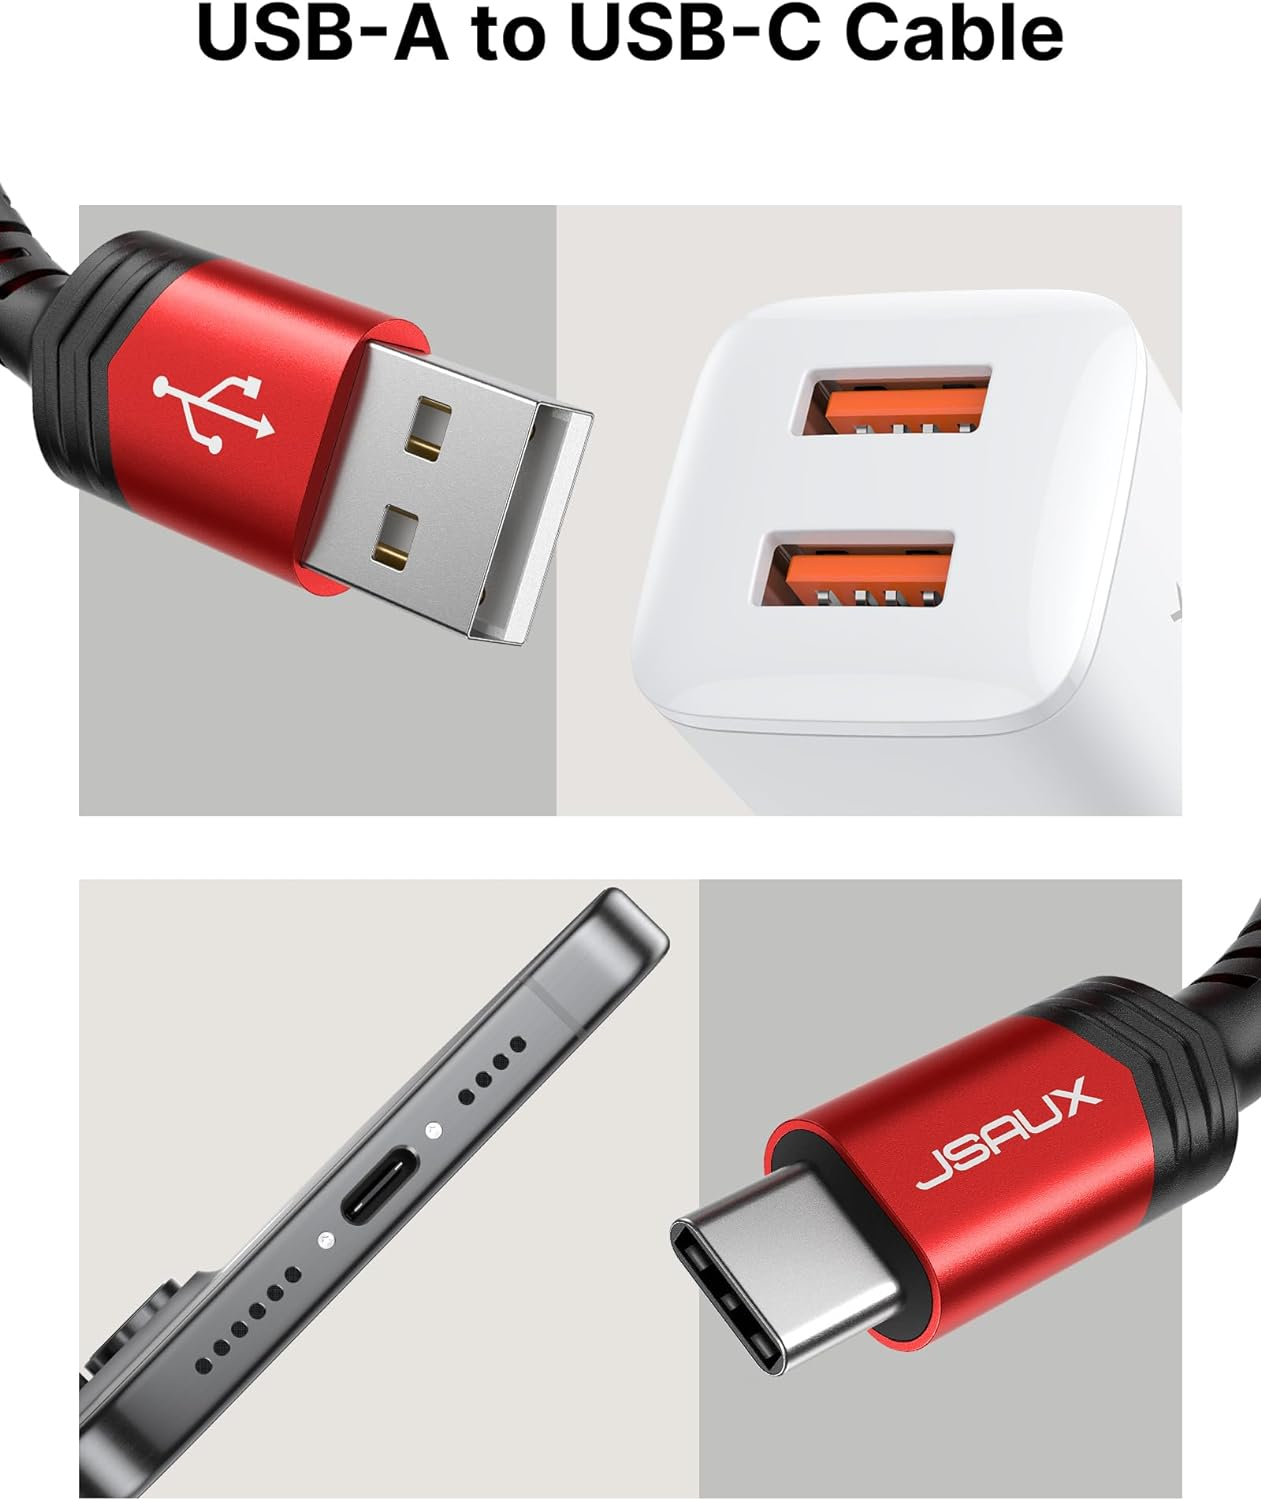 2-Pack 6.6' JSAUX USB-C to USB-A Braided Charging Cables (Red) $3.59 + FS w/ Prime or orders $35+ $3.95